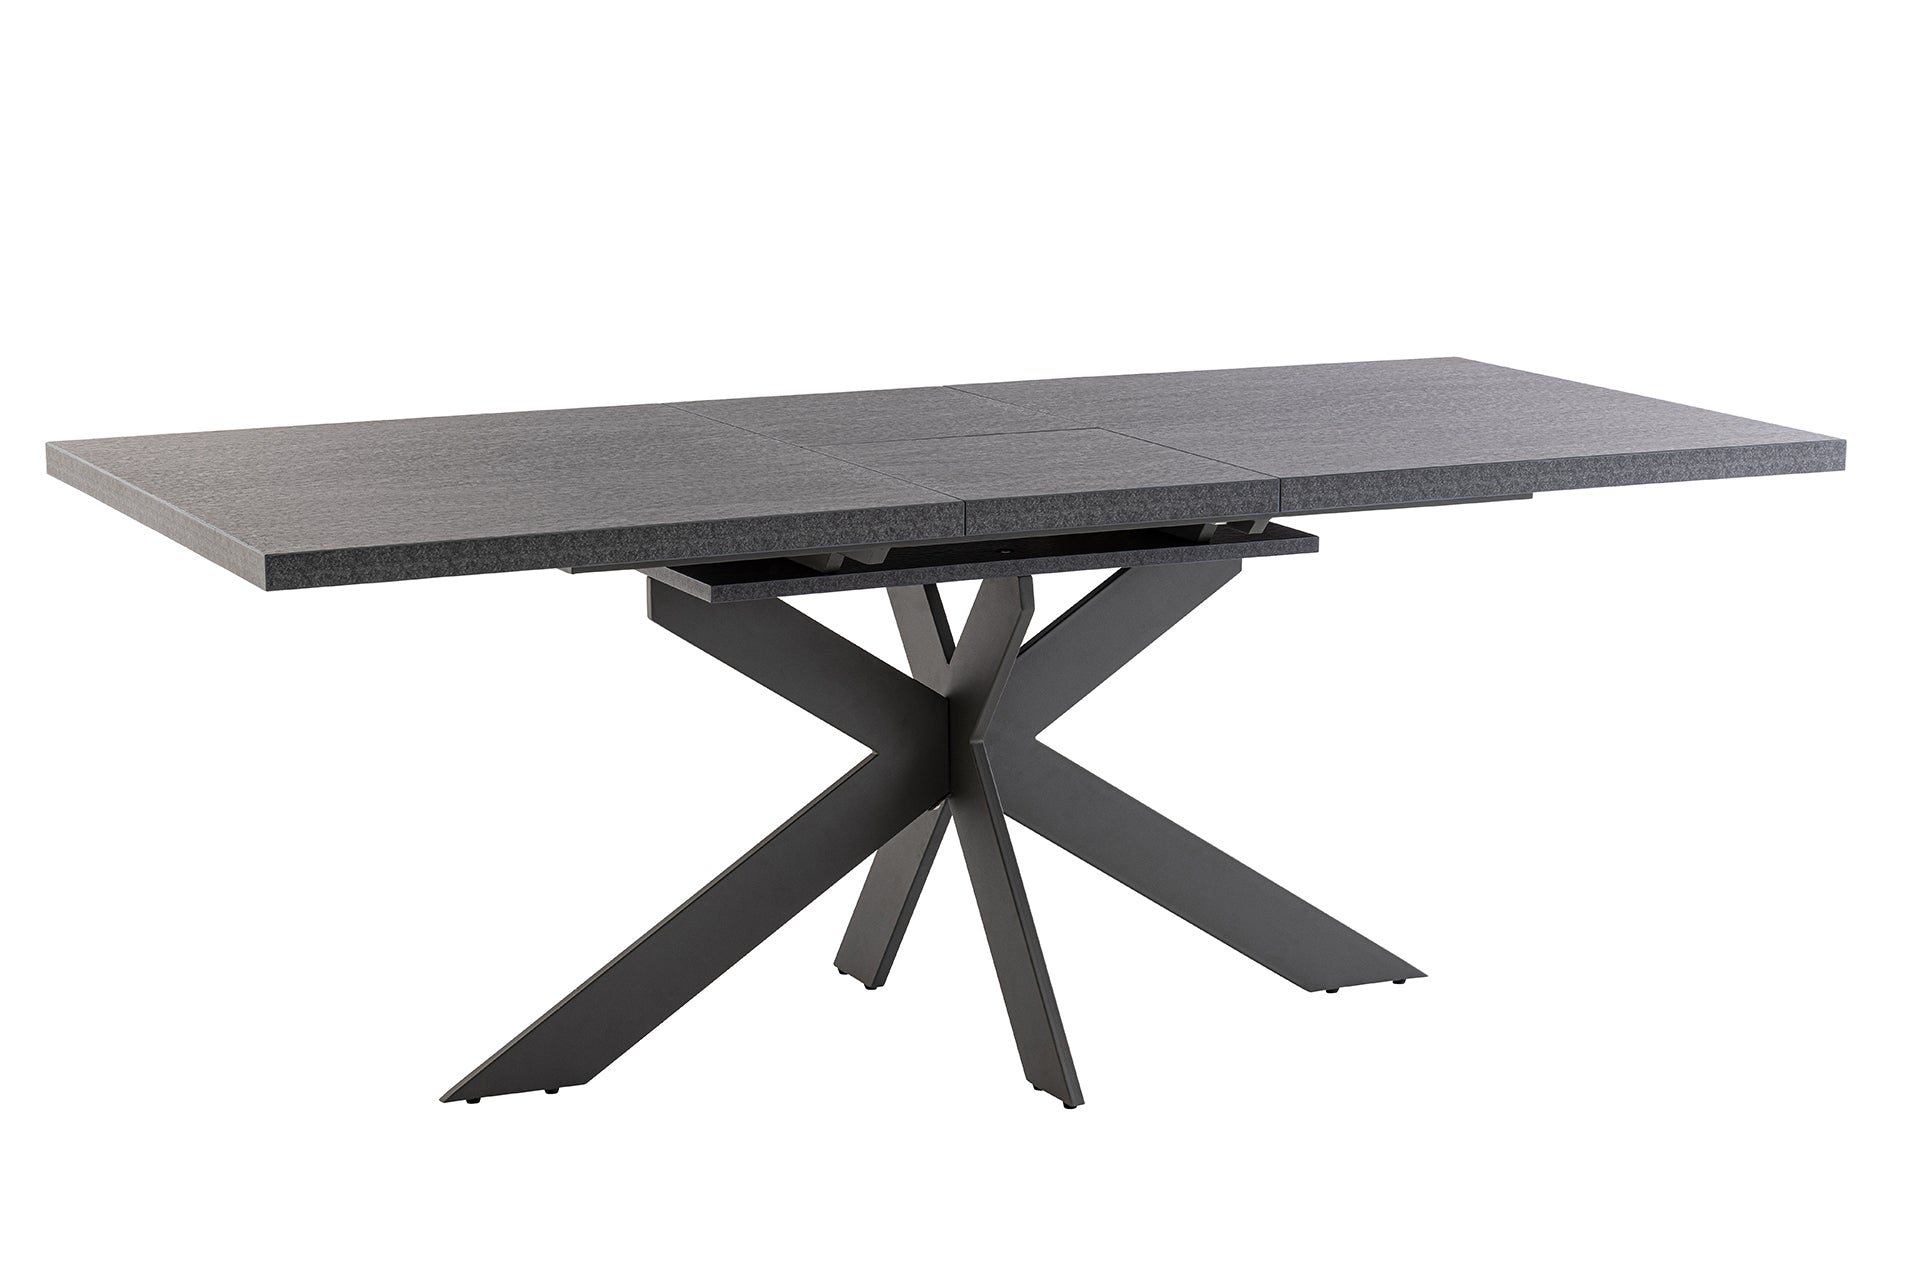 2.0 m extending dining table